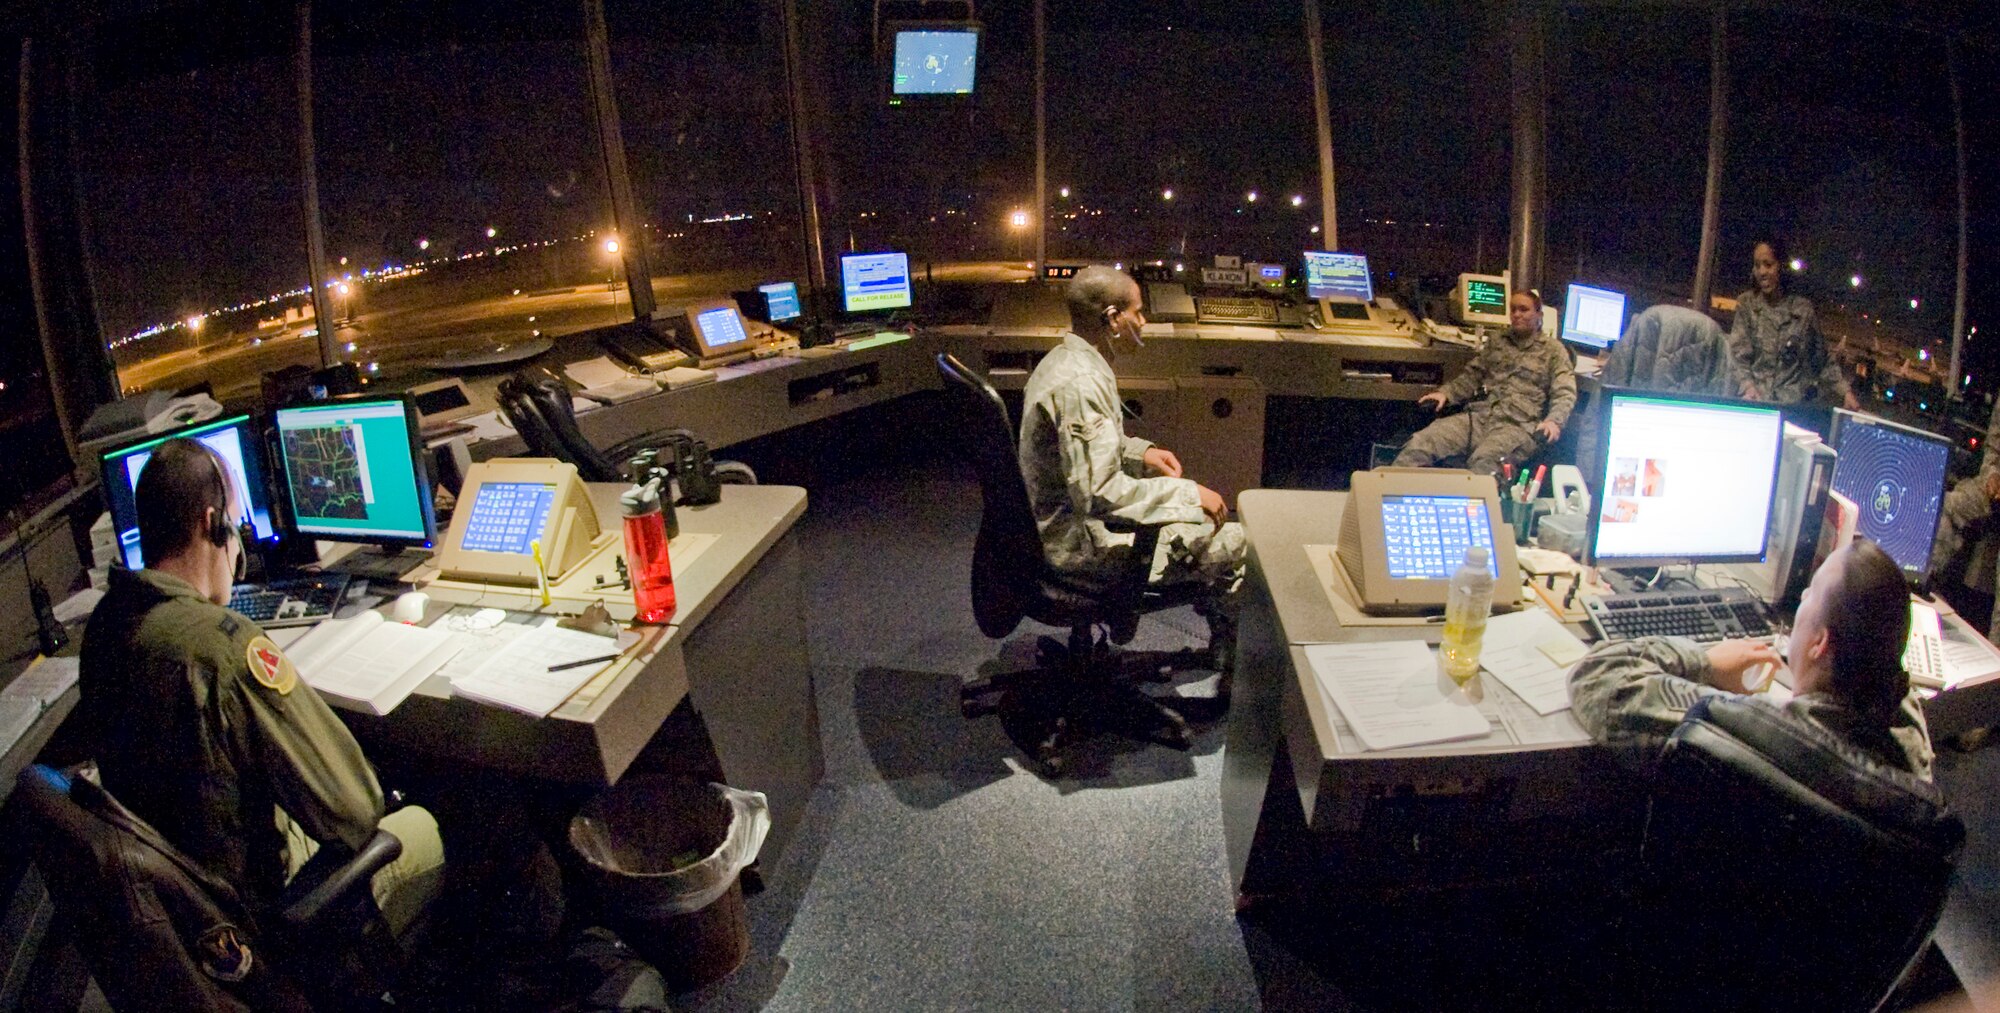 Air traffic controllers with the 2nd Operations Support Squadron await the next incoming aircraft from the control tower on Barksdale Air Force Base, La., Jan. 12. Air traffic controllers control the movement of aircraft into and out of military airfields by tracking multiple aircraft simultaneously using radar and radio communication. Due to the high volume of training missions accomplished here, ATCs must man the tower 24/7. (U.S. Air Force photo/Senior Airman Chad Warren)(RELEASED)